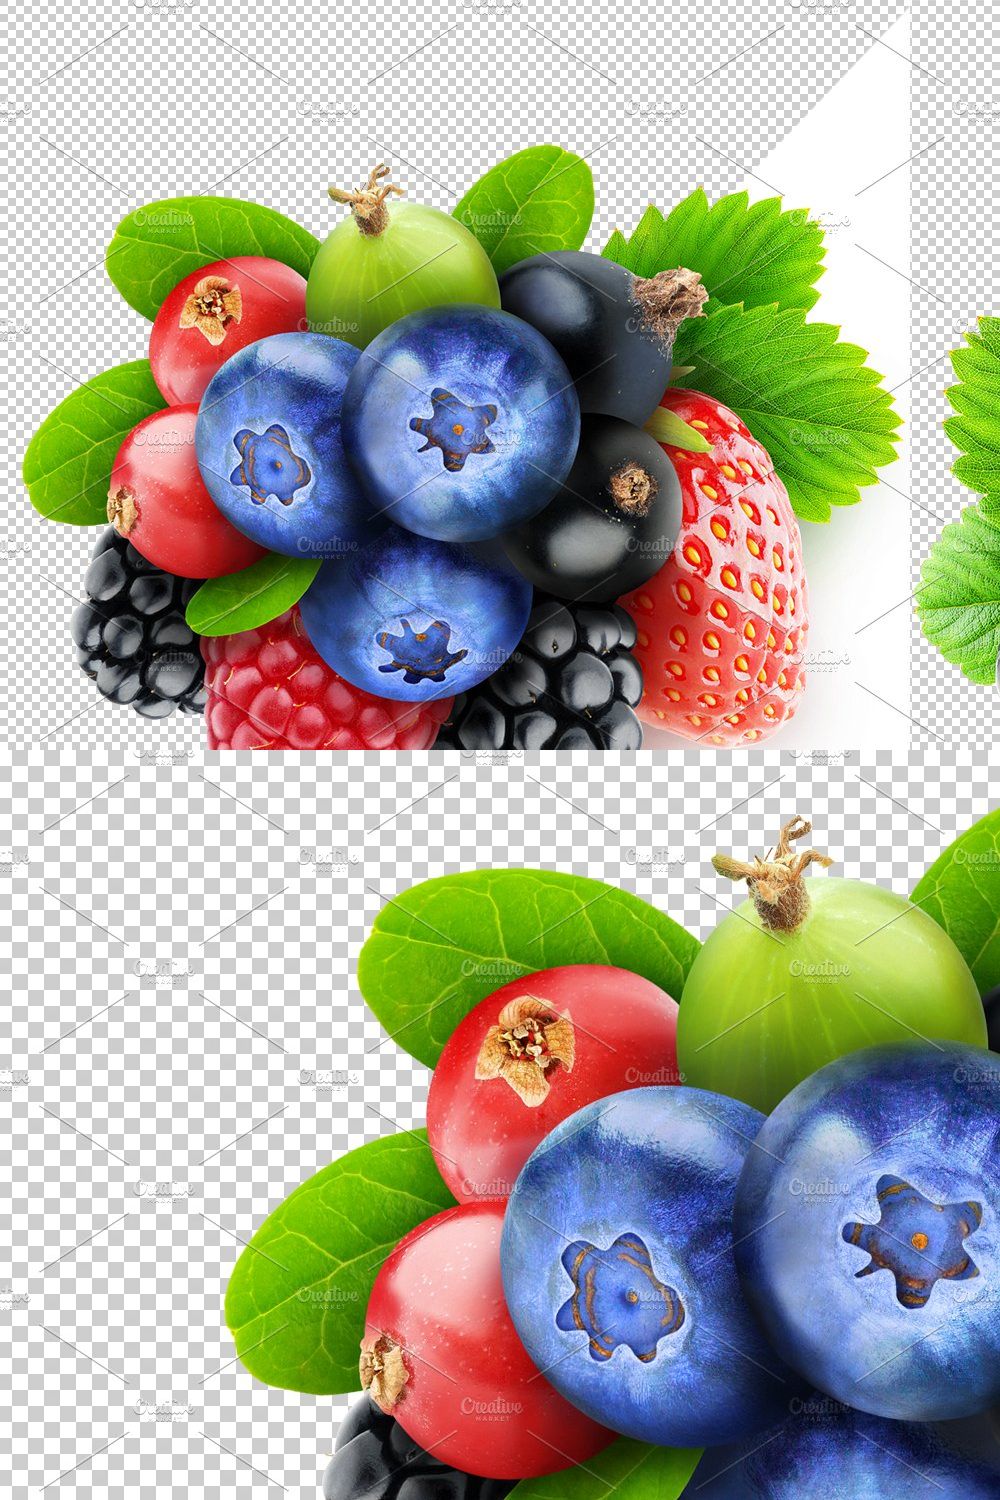 Mixed berries pinterest preview image.